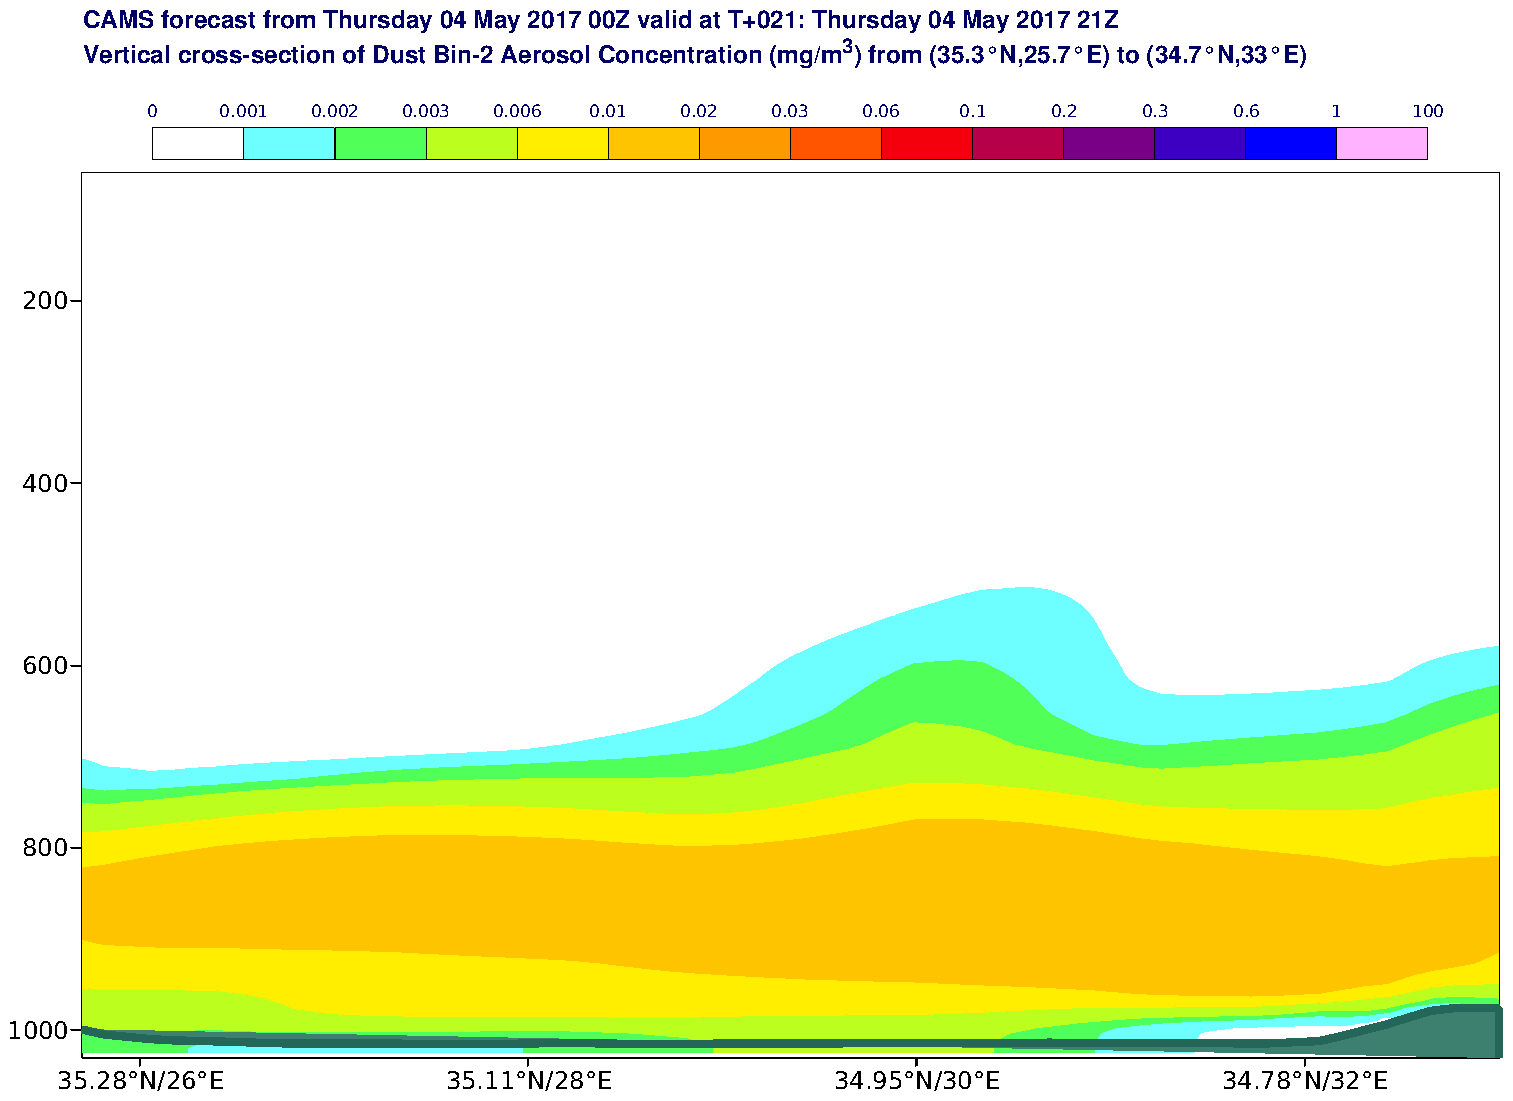 Vertical cross-section of Dust Bin-2 Aerosol Concentration (mg/m3) valid at T21 - 2017-05-04 21:00